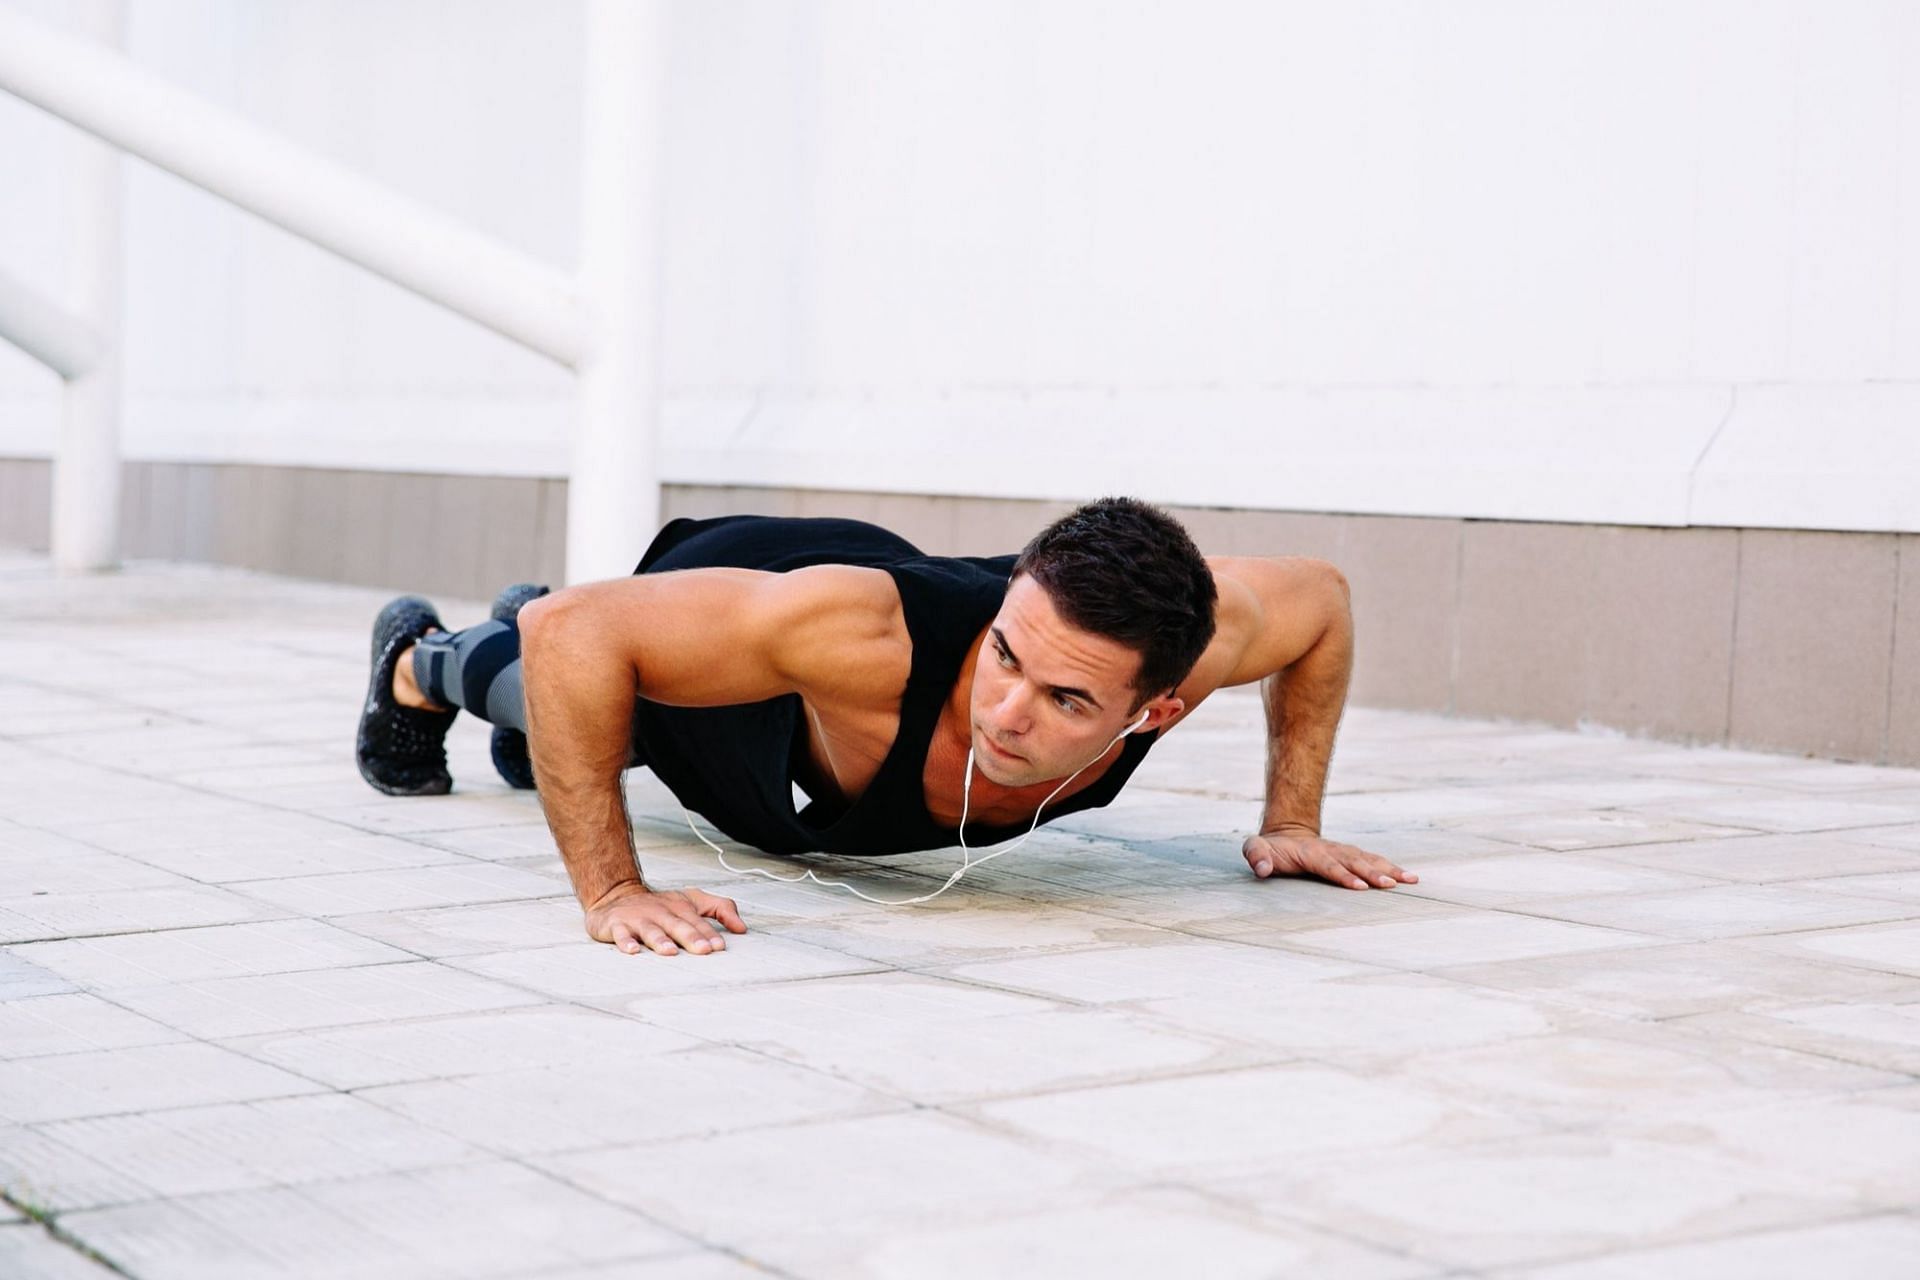 There are differences between standard plank and RKC plank. (Photo via Freepik/ freepic.diller)